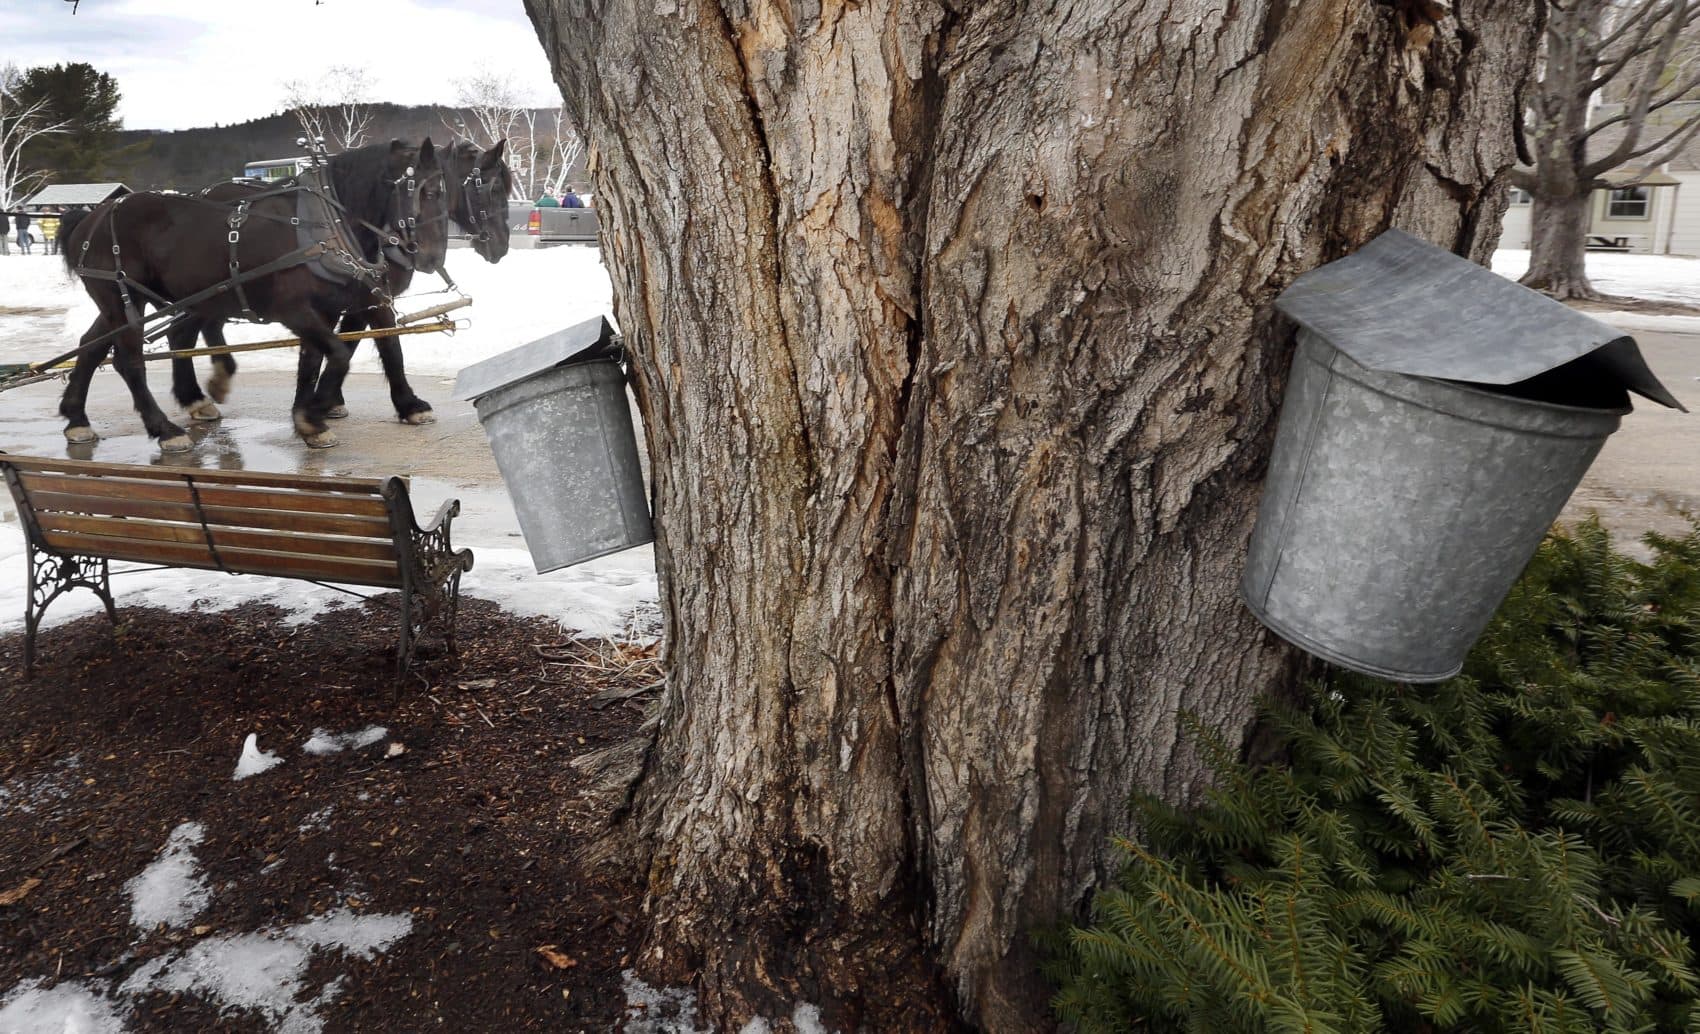 Sap buckets hang from a maple tree as draft horses Bill and Cote walk past in Alton, N.H. in 2016. (Jim Cole/AP)